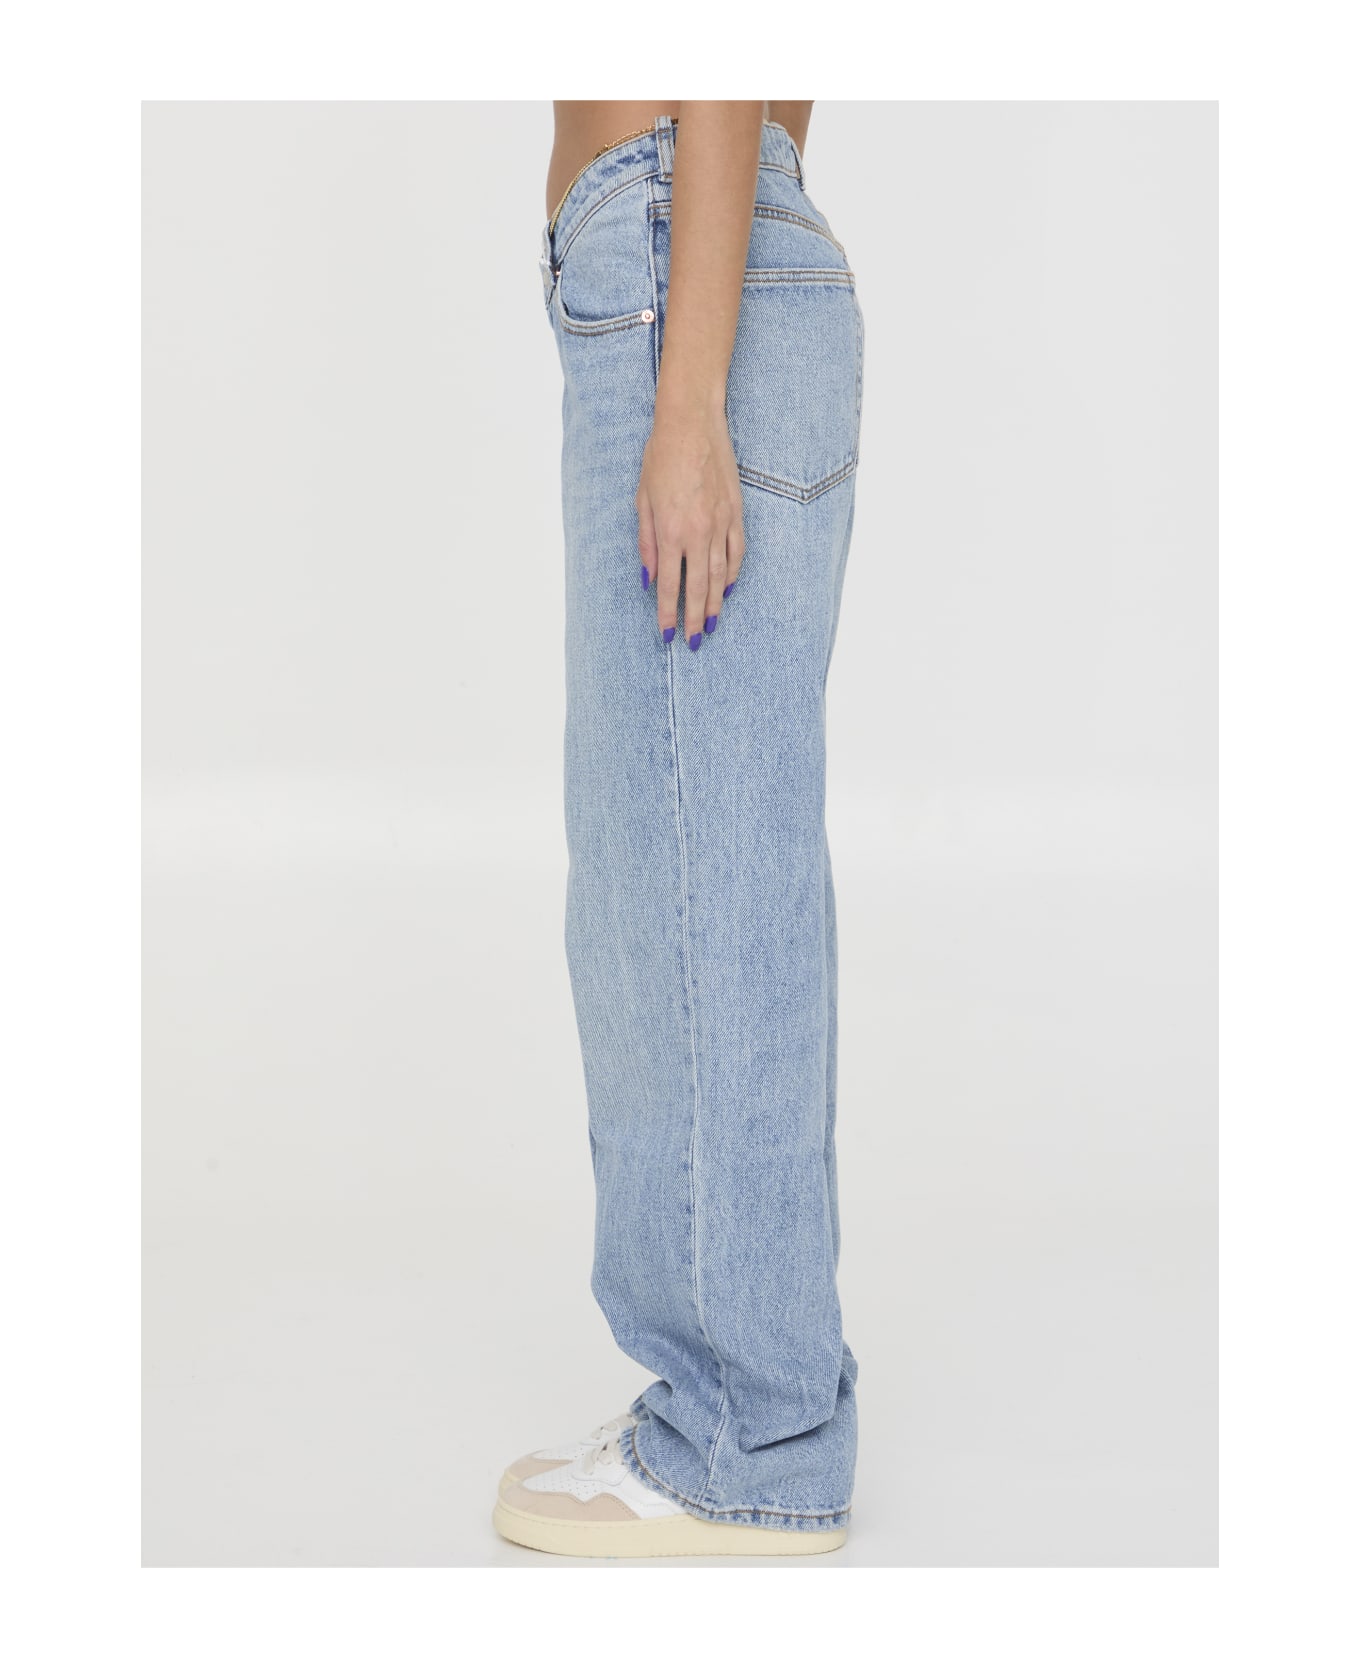 Alexander Wang Denim Jeans With Nameplate - BLUE デニム